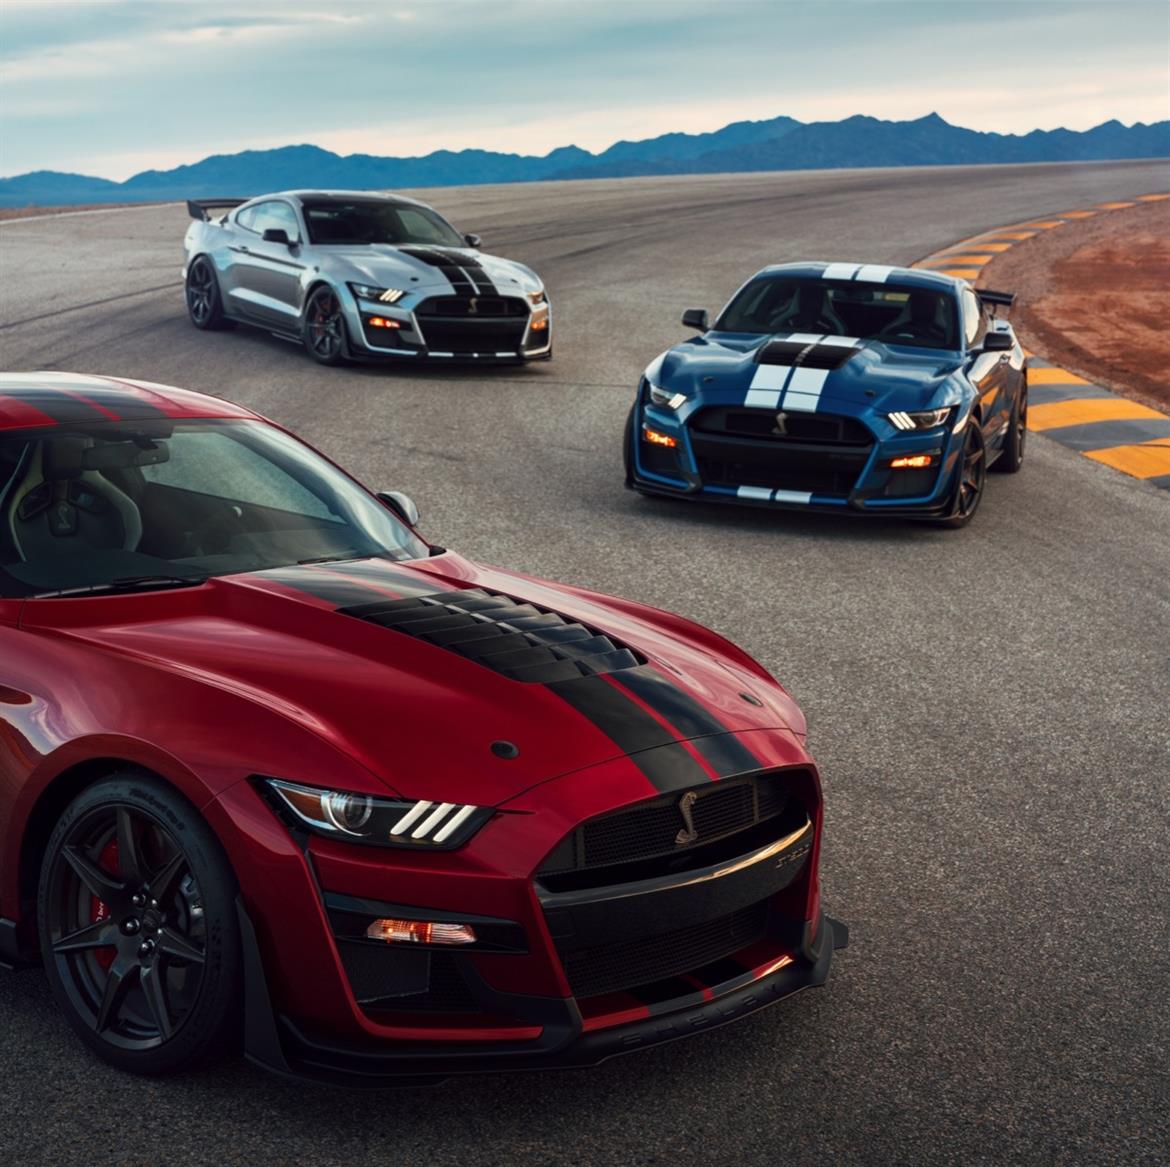 2020 Mustang Shelby GT500 Is Ford's Most Powerful Street Car Ever